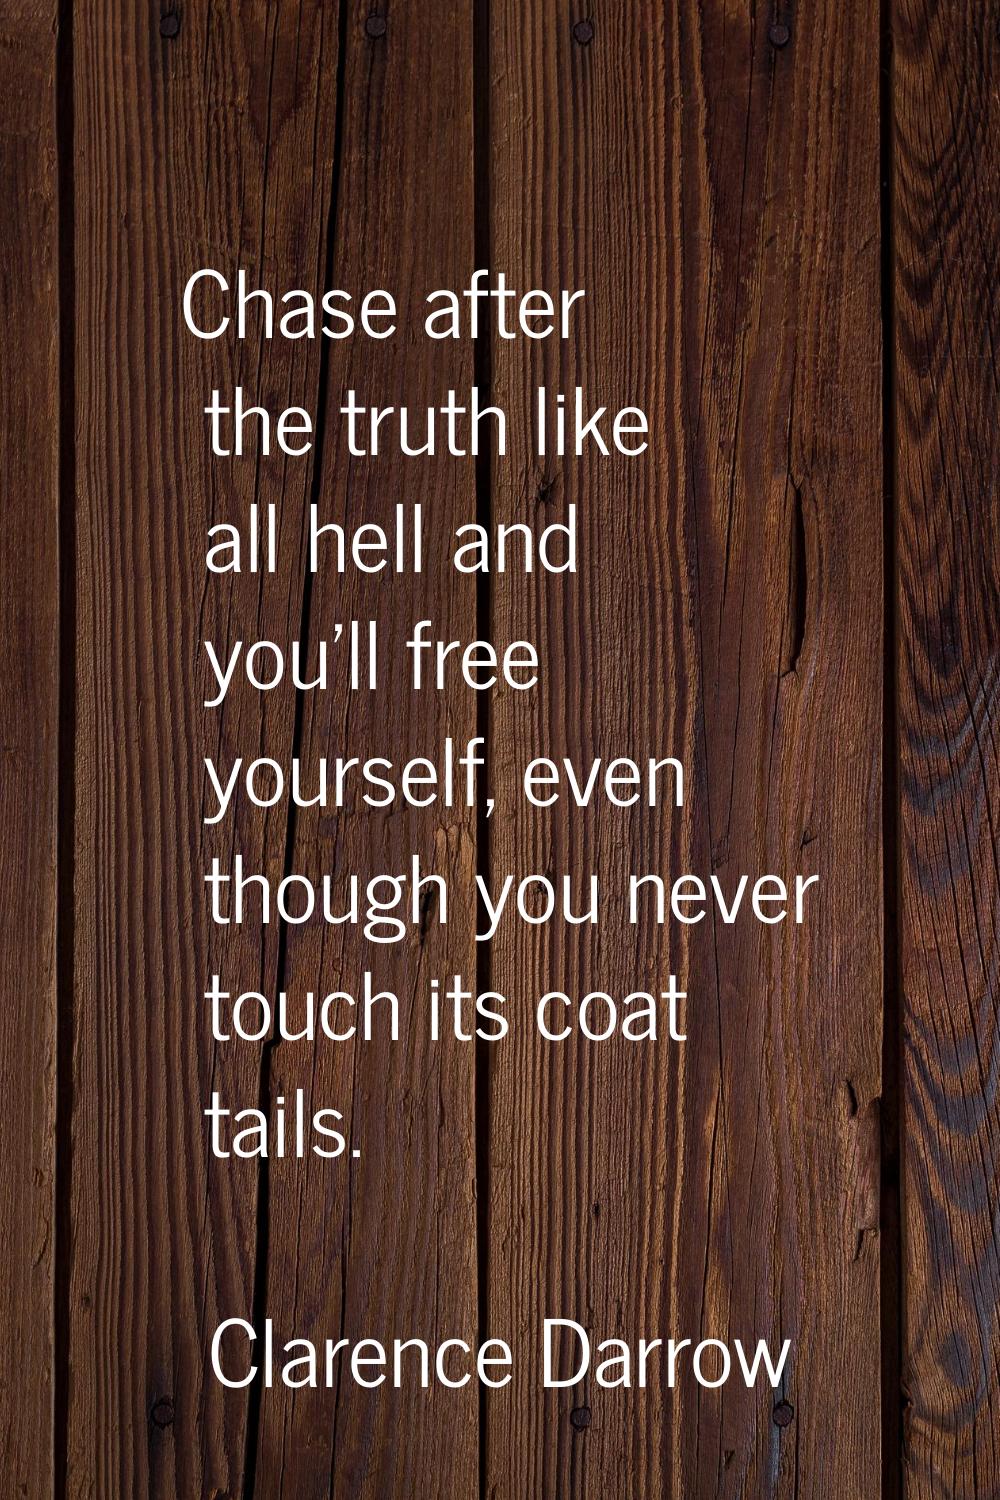 Chase after the truth like all hell and you'll free yourself, even though you never touch its coat 